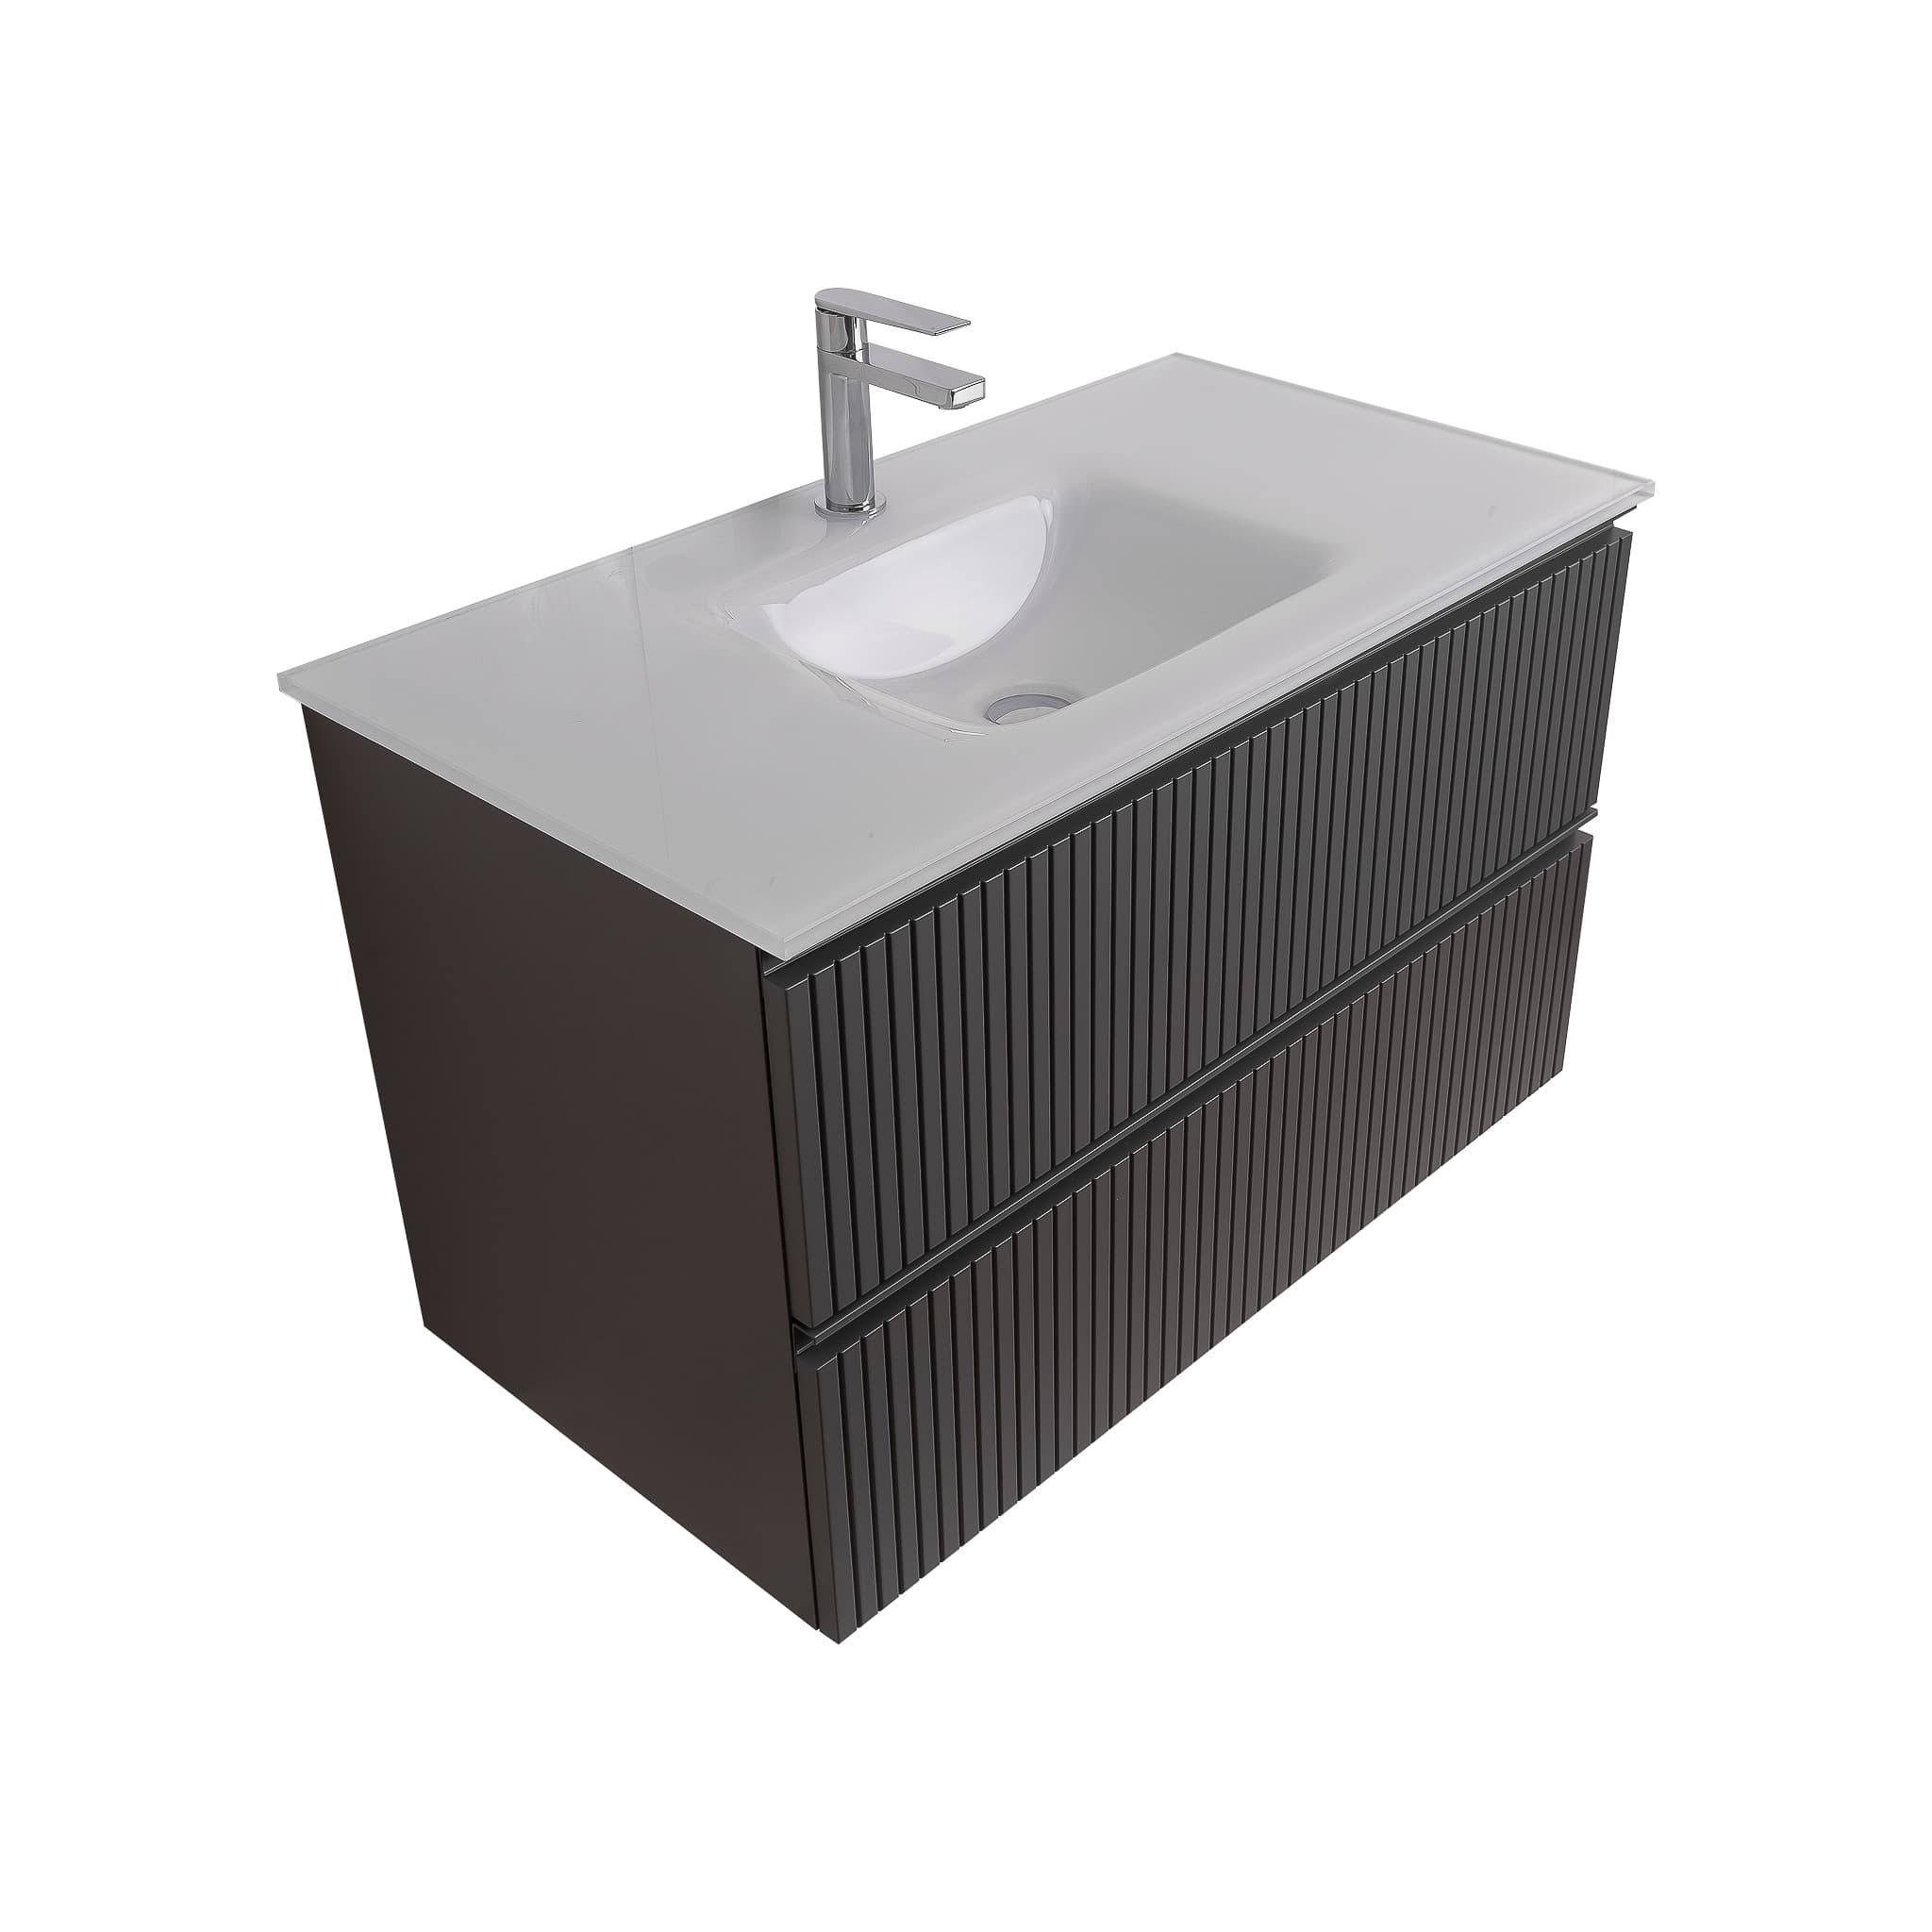 Ares 31.5 Matte Grey Cabinet, White Tempered Glass Sink, Wall Mounted Modern Vanity Set